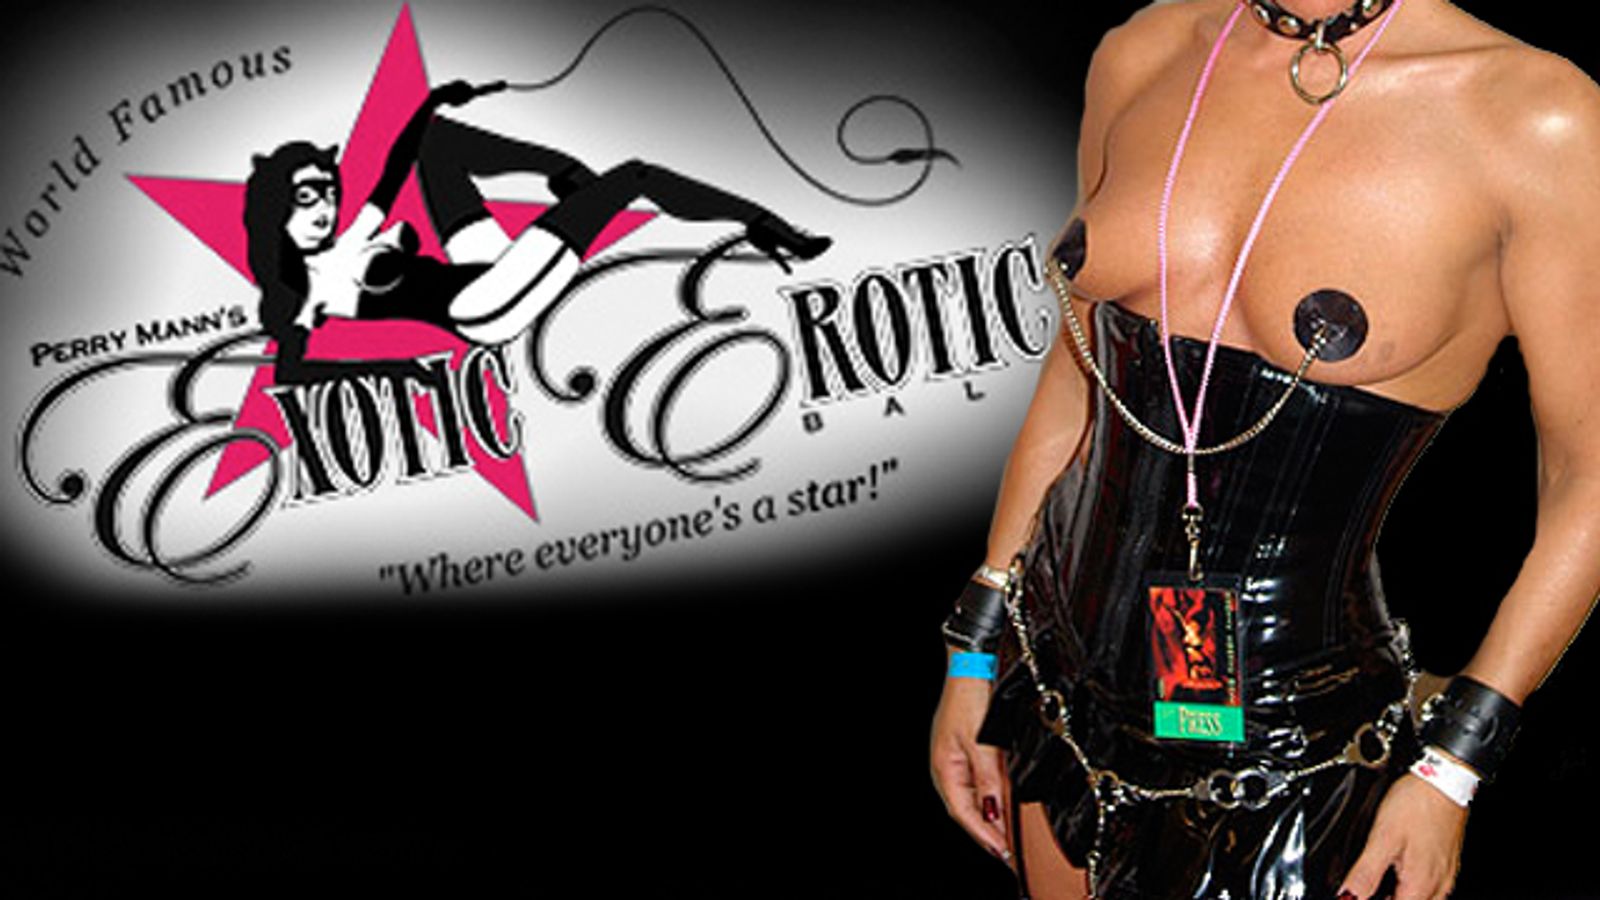 Exotic Erotic Ball Celebrates 30th Ann. with Travel Values